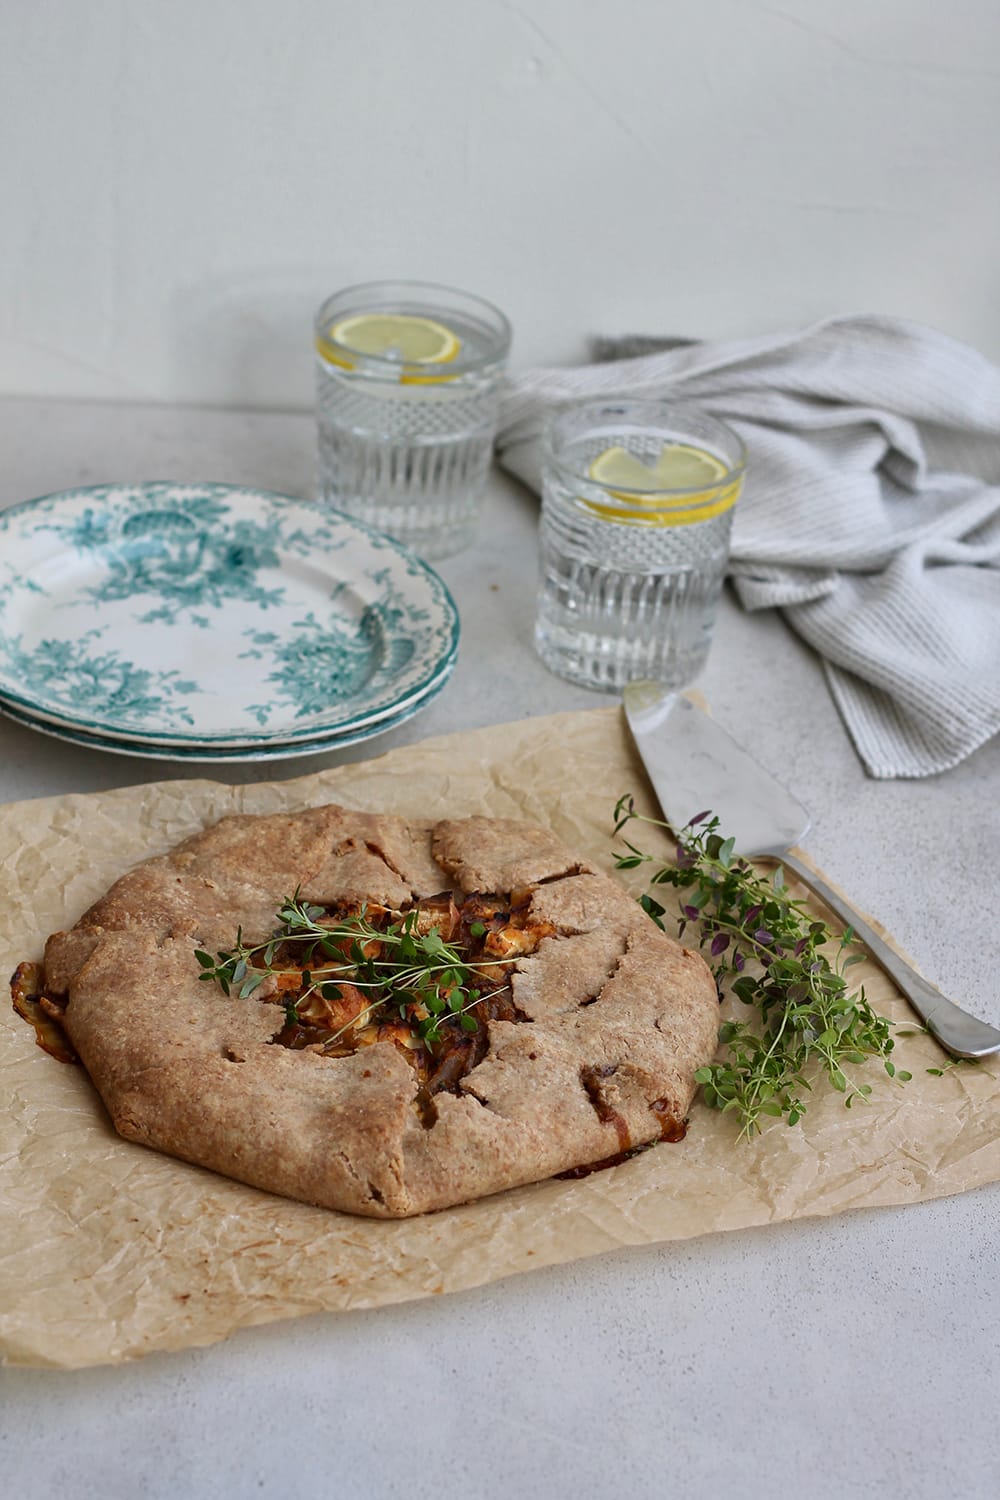 Caramelized Onion Galette